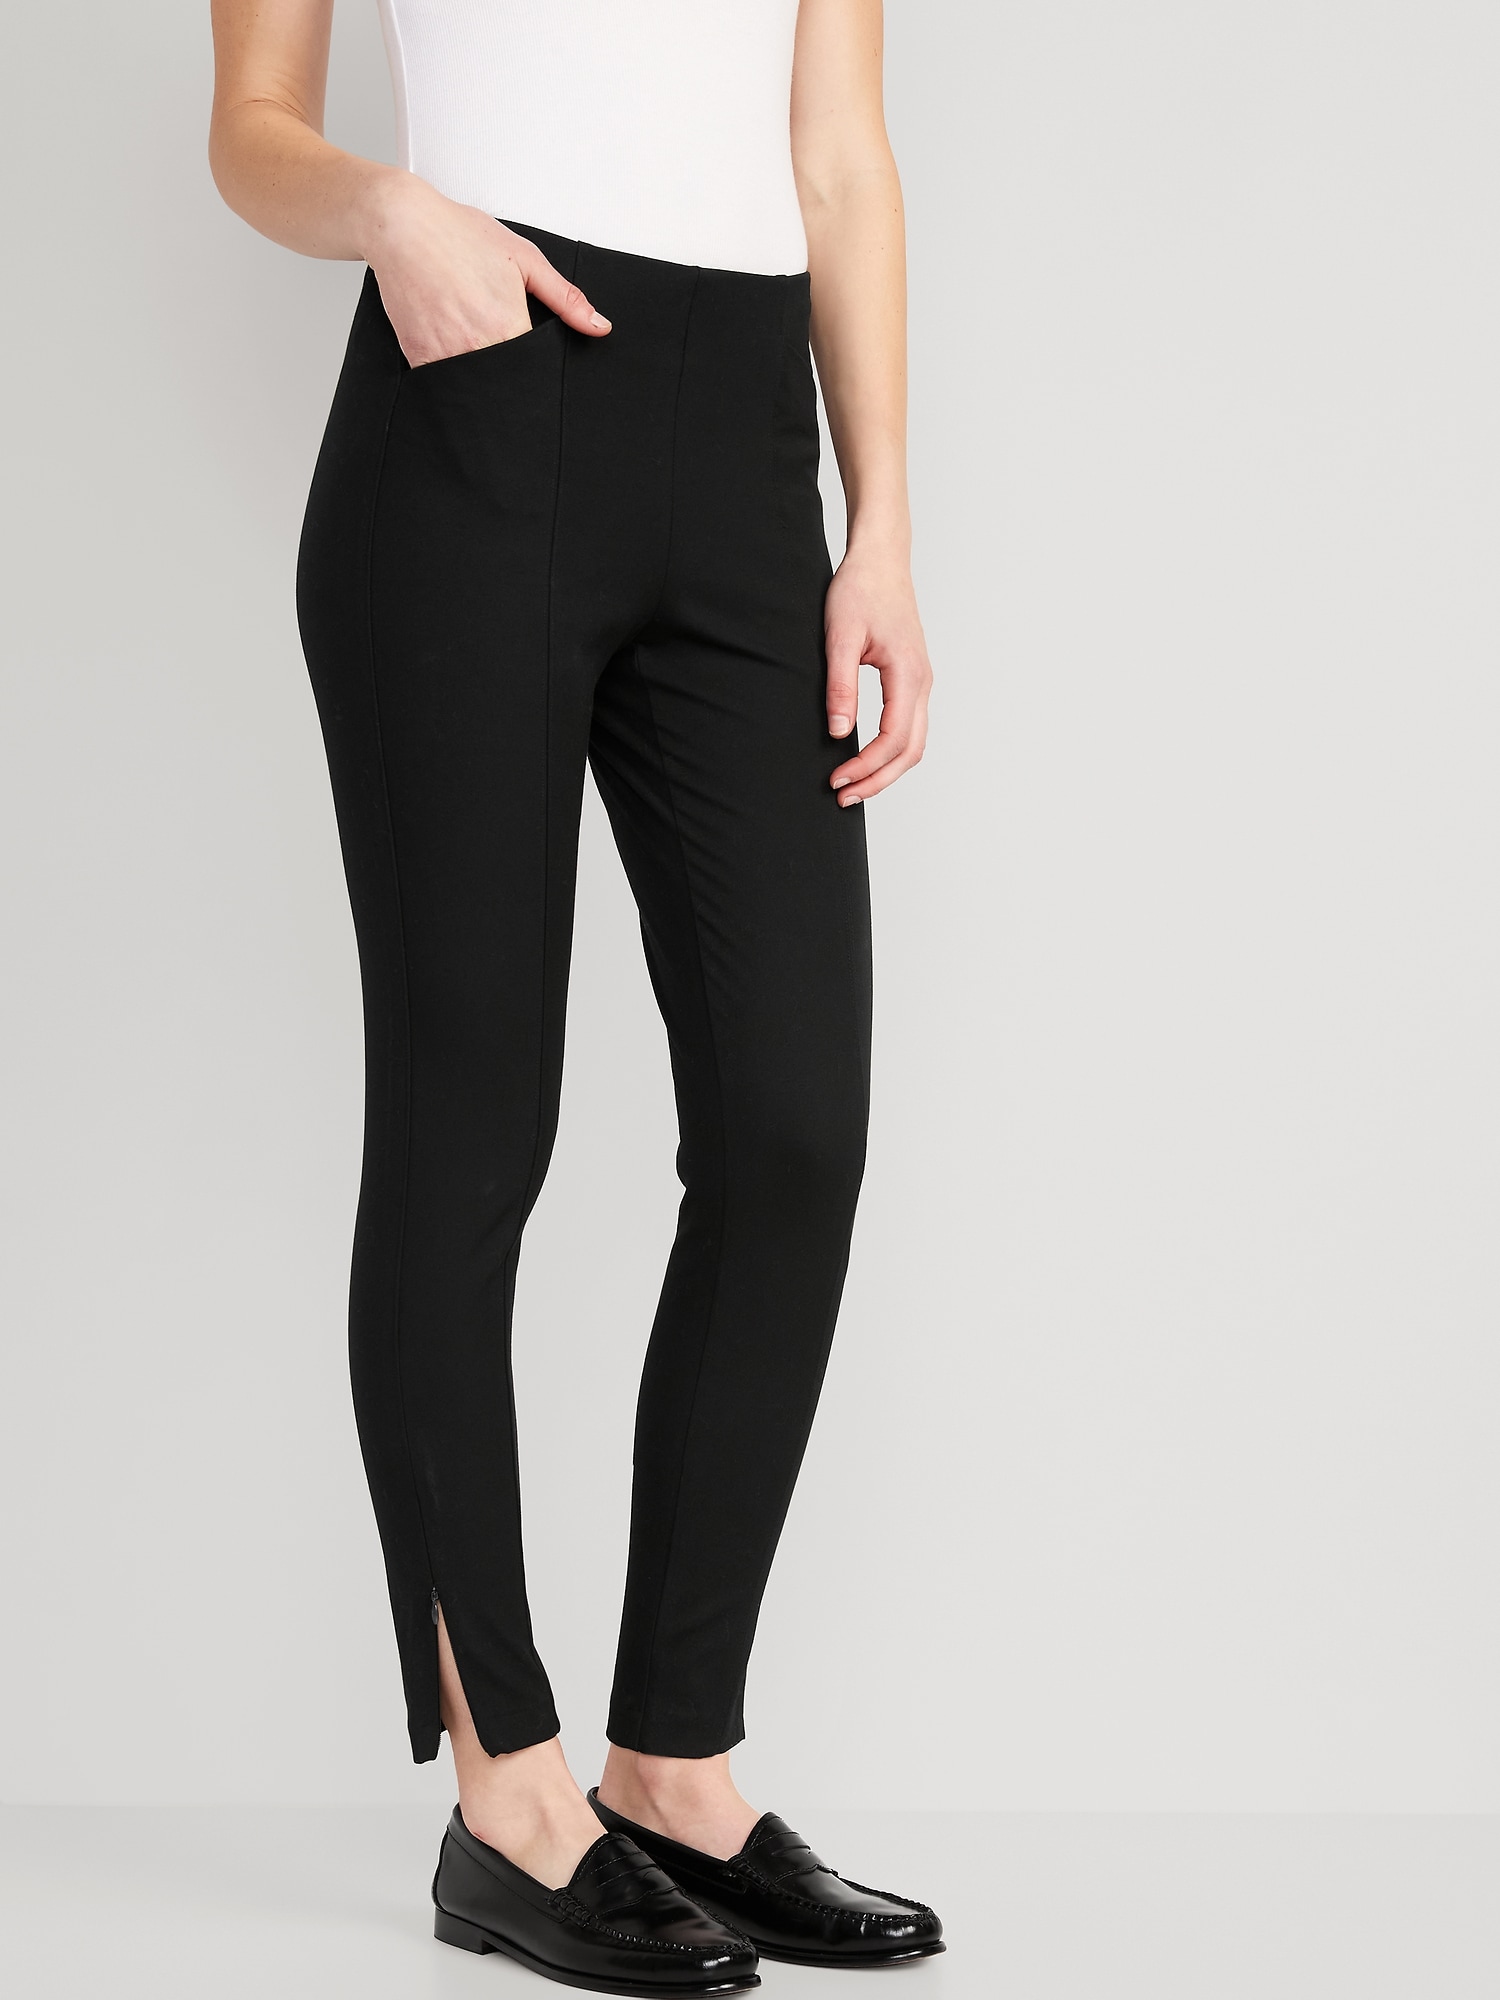 High-Waisted Pull-On Pixie Skinny Ankle Pants for Women | Old Navy